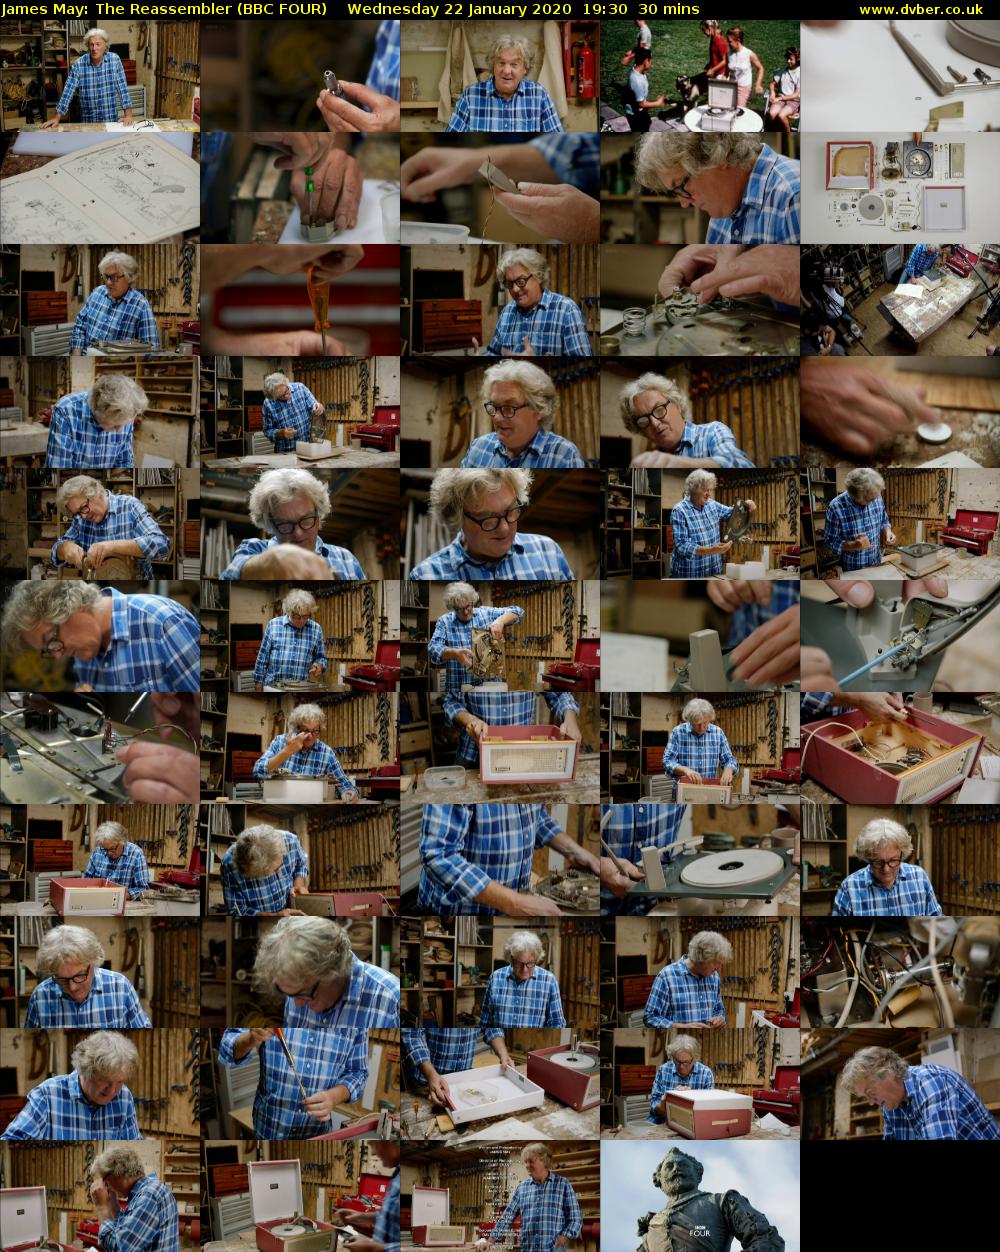 James May: The Reassembler (BBC FOUR) Wednesday 22 January 2020 19:30 - 20:00